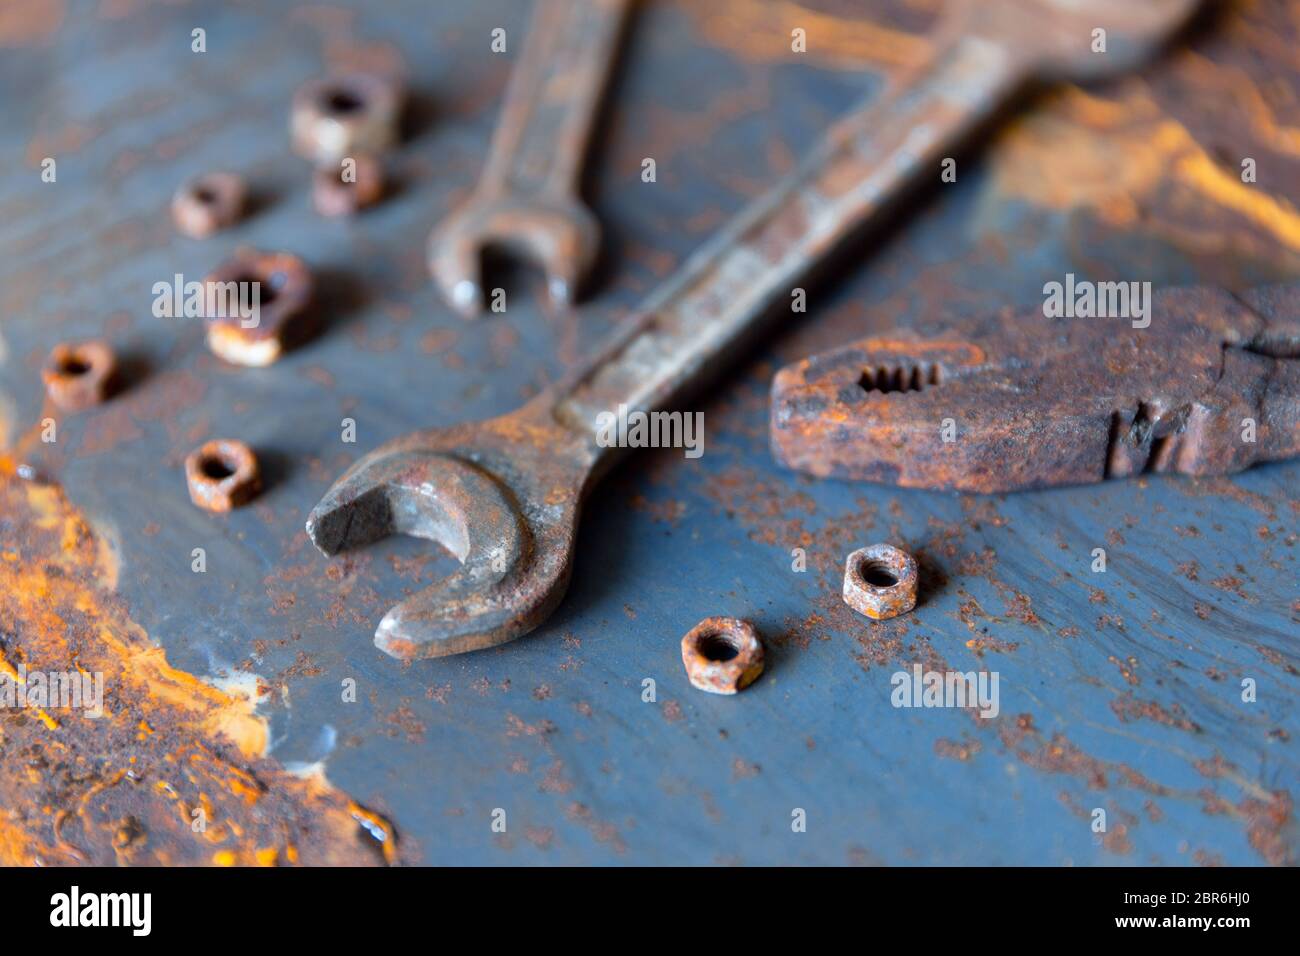 Old rusty wrench over battered metal table rough style. Wrenches top view for construction, industrial, electrician concept design Stock Photo